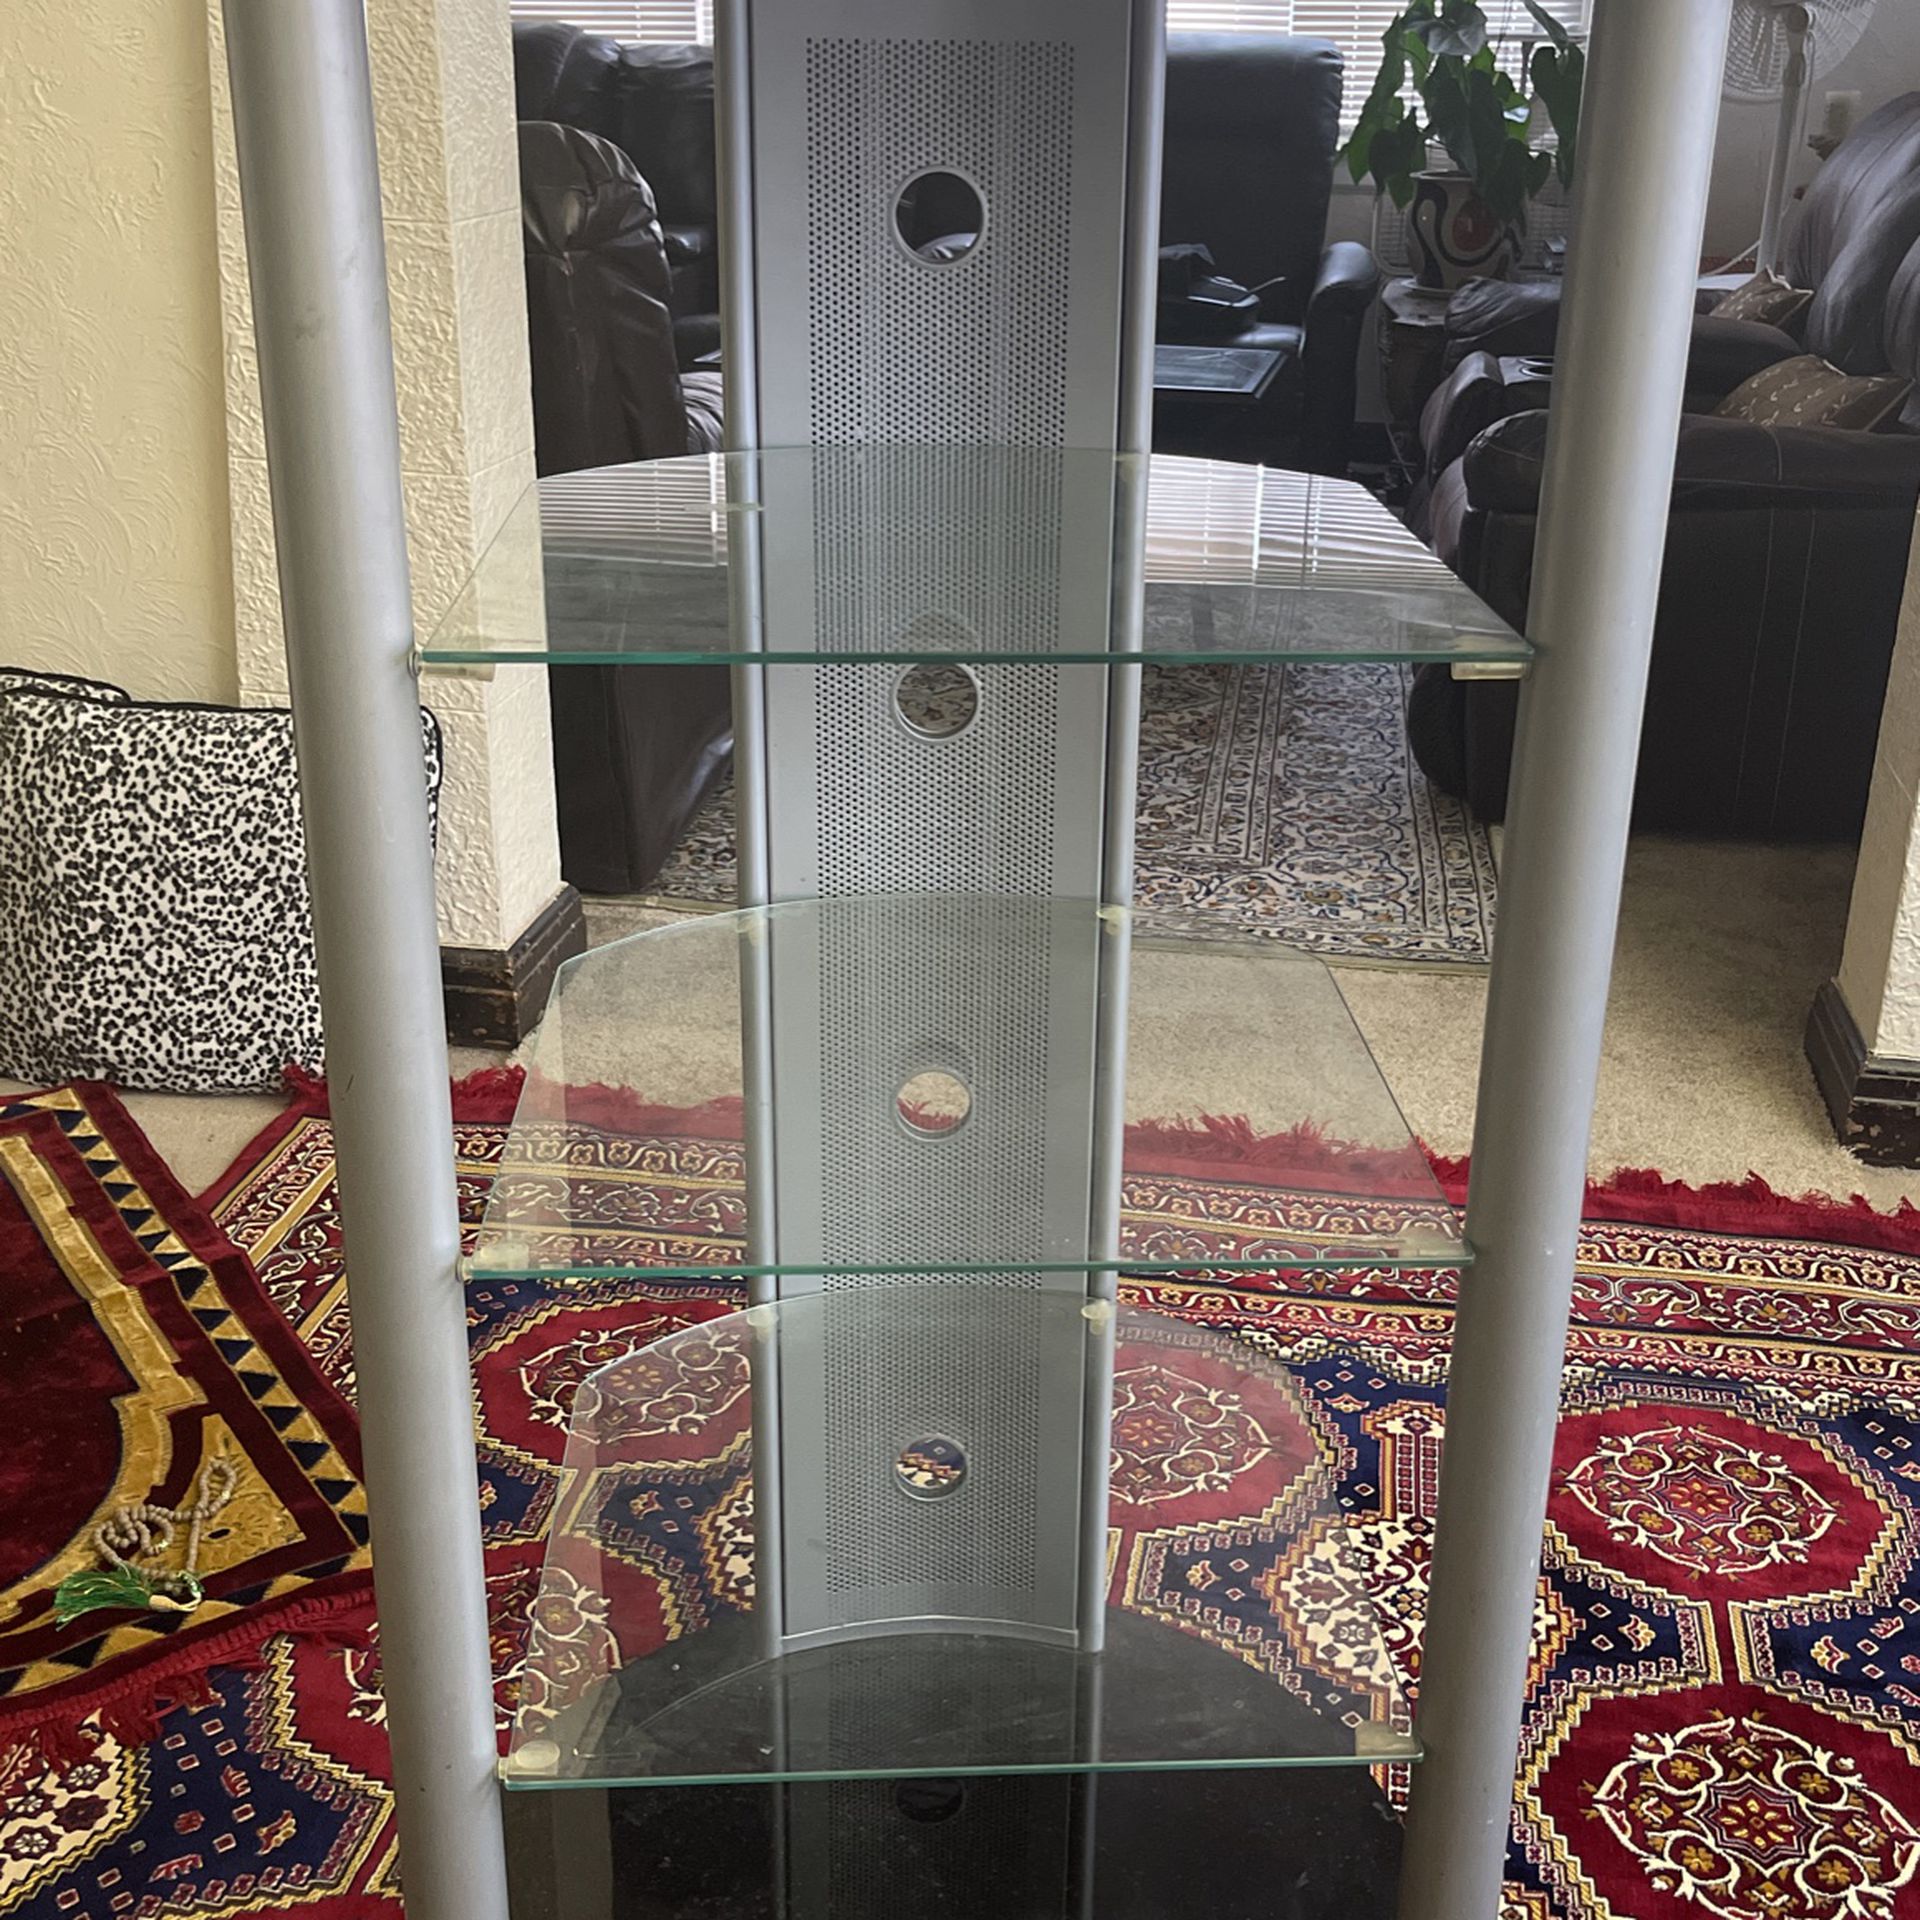 Glass tv table